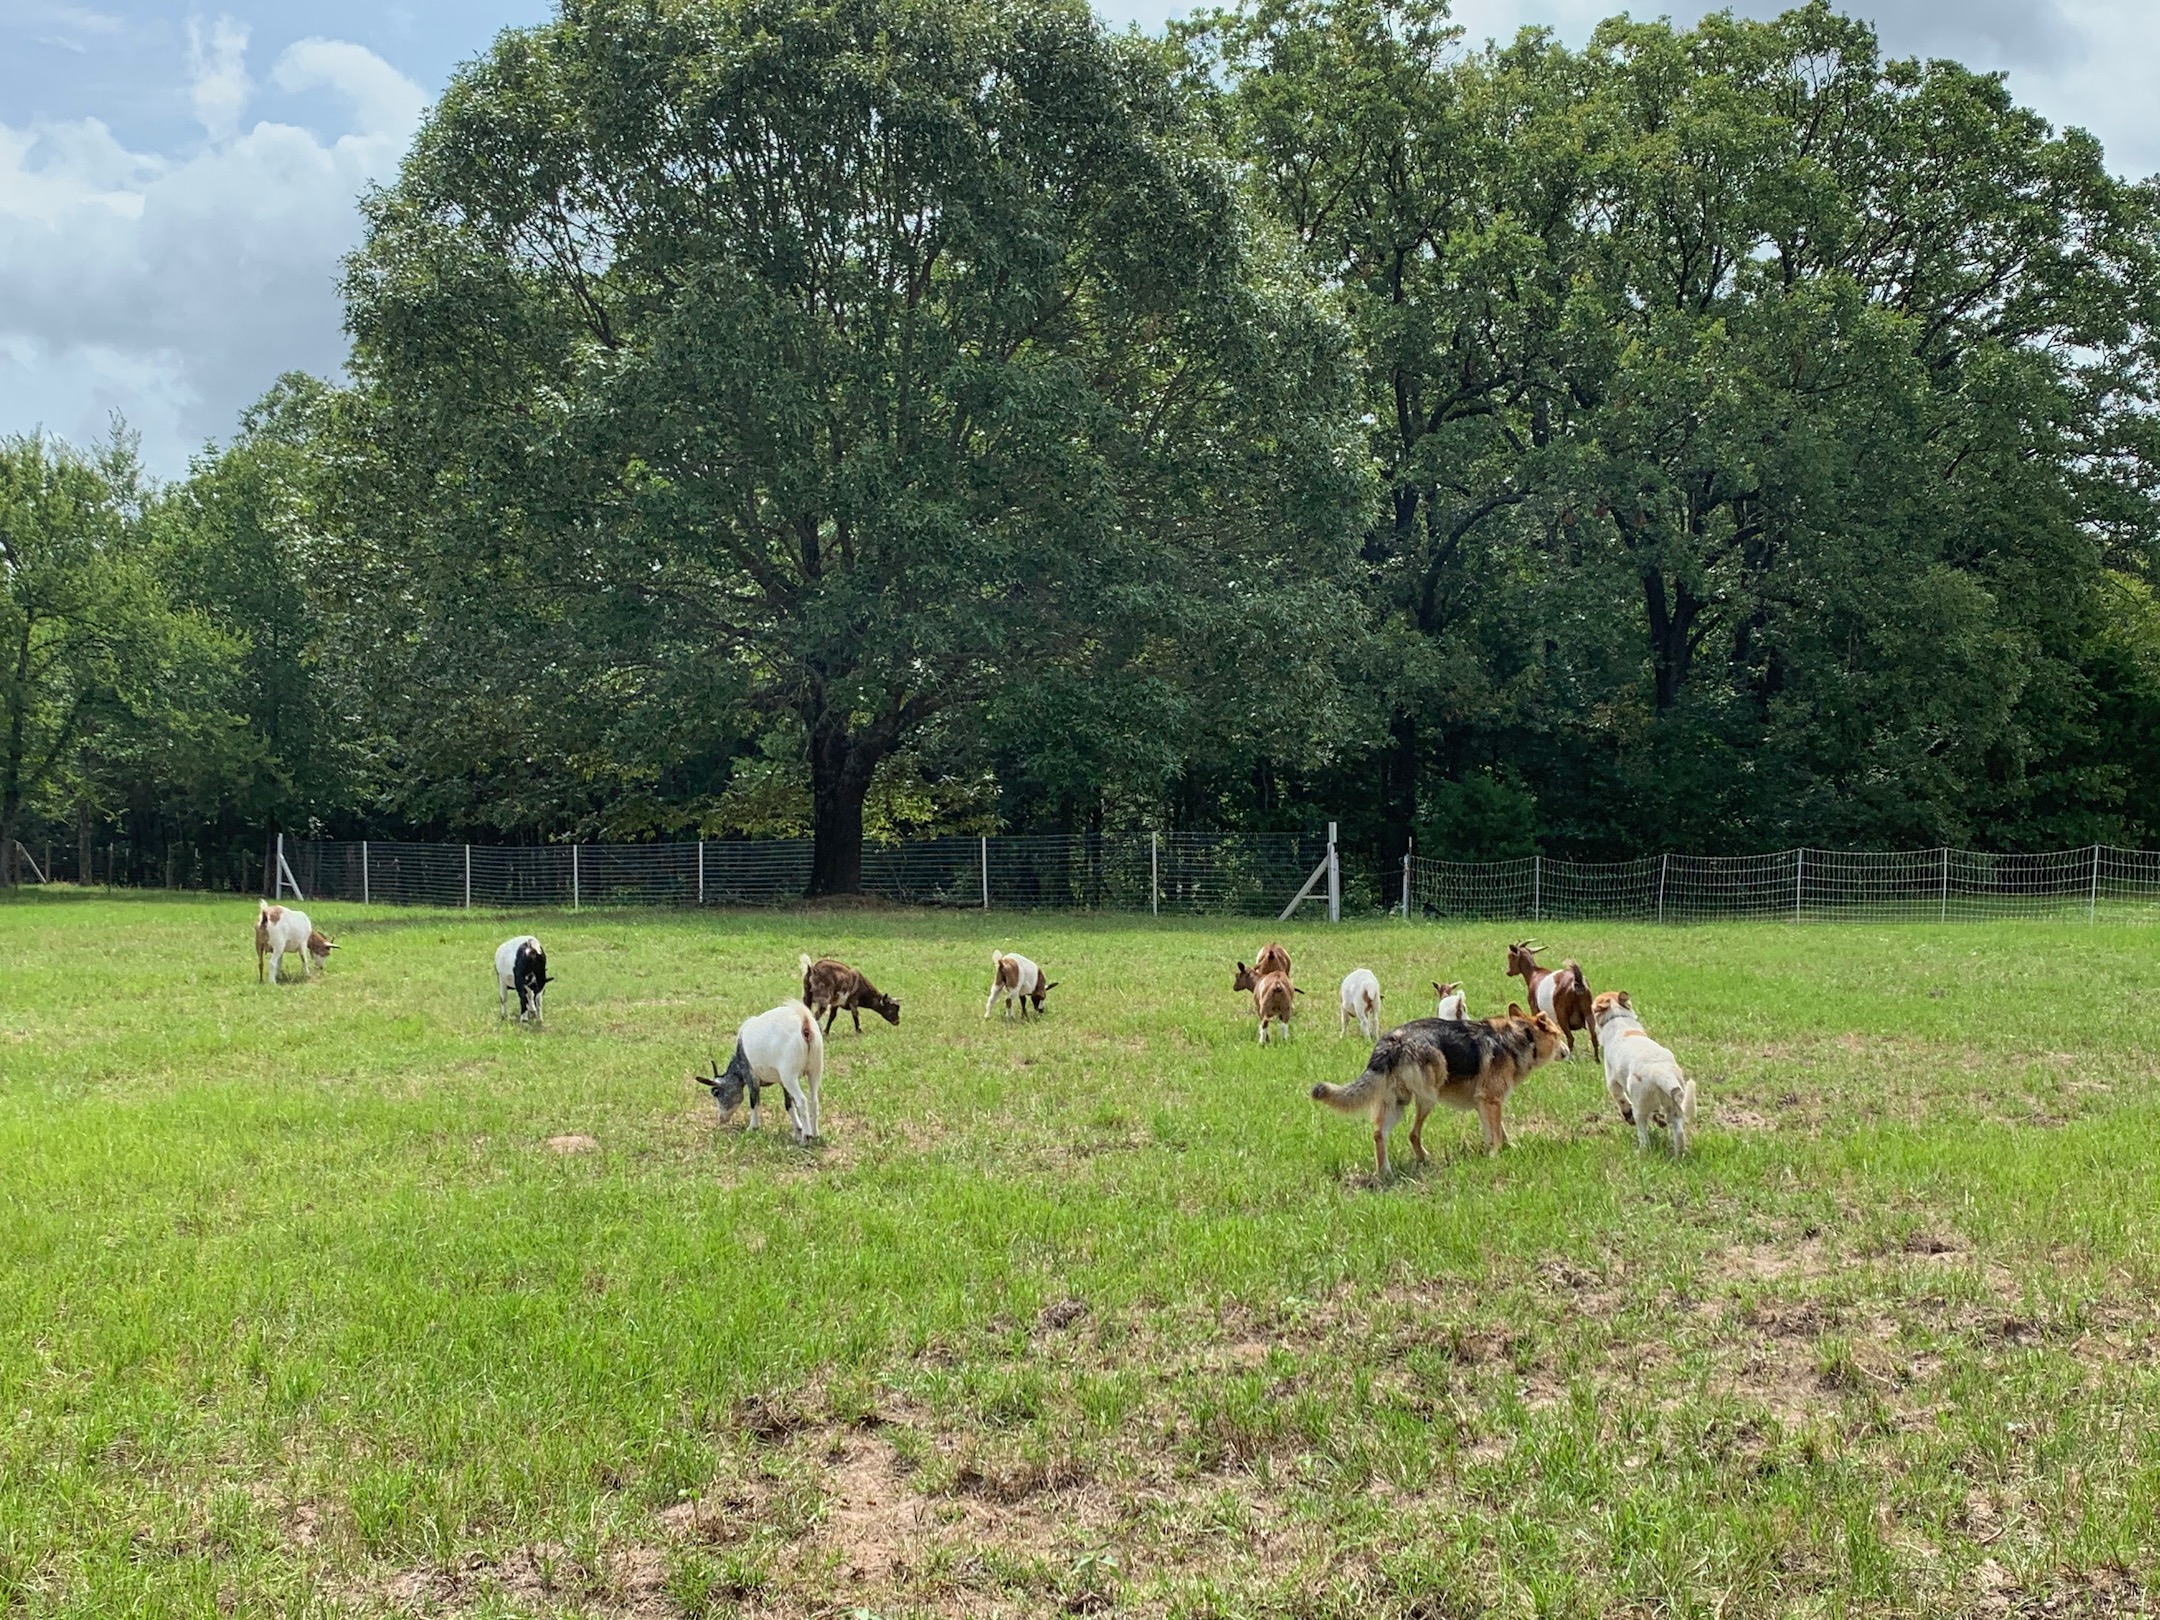 Goats in the Field